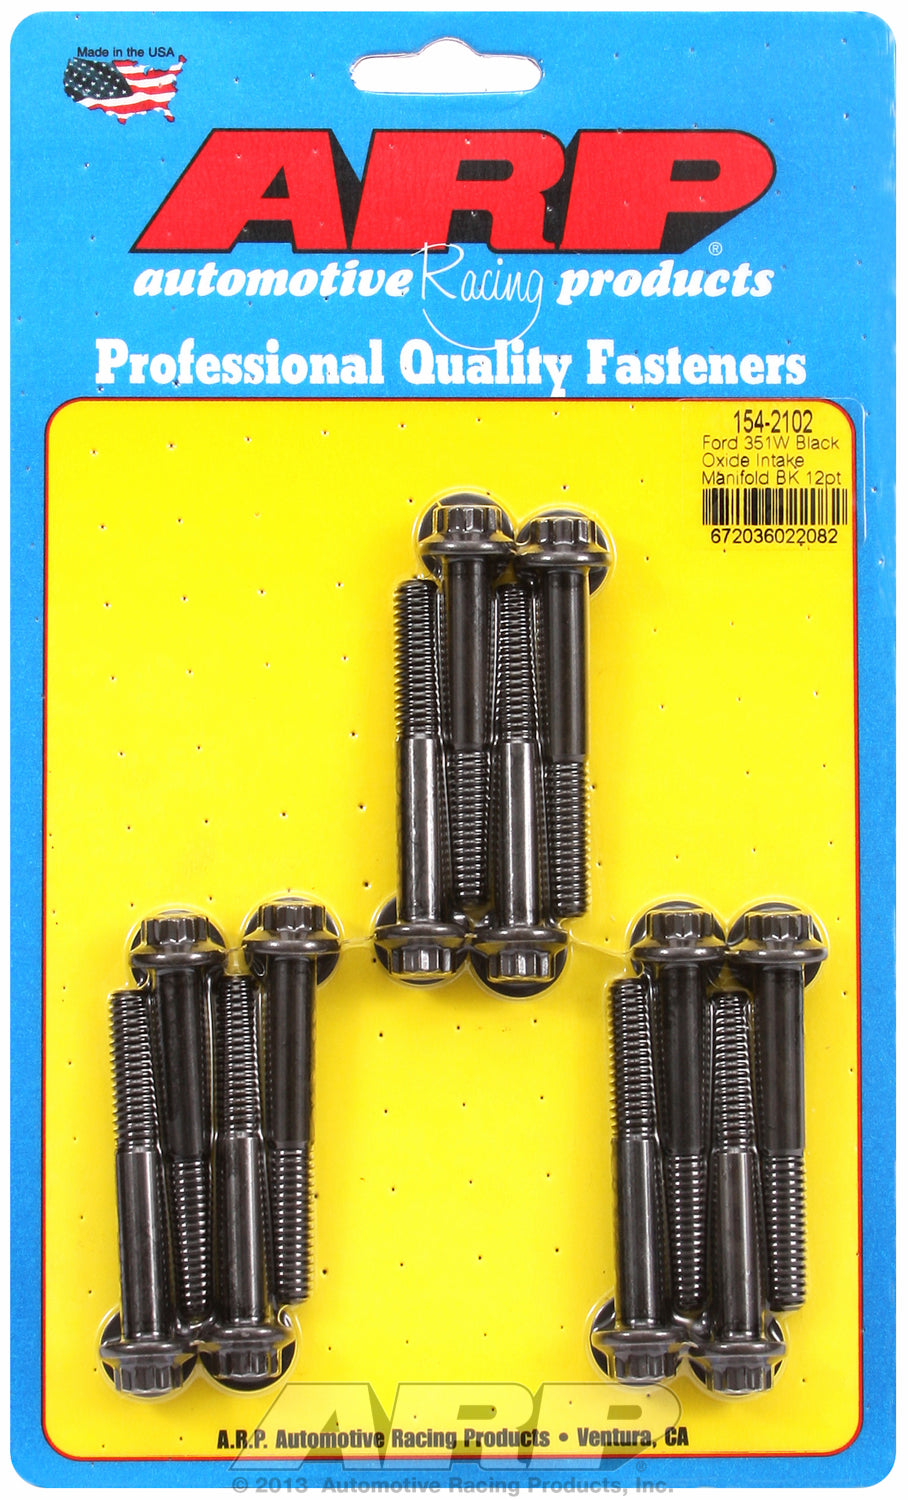 12-Pt Head Black Oxide Intake Manifold Bolts for Ford 351W, uses 3/8 wrenching